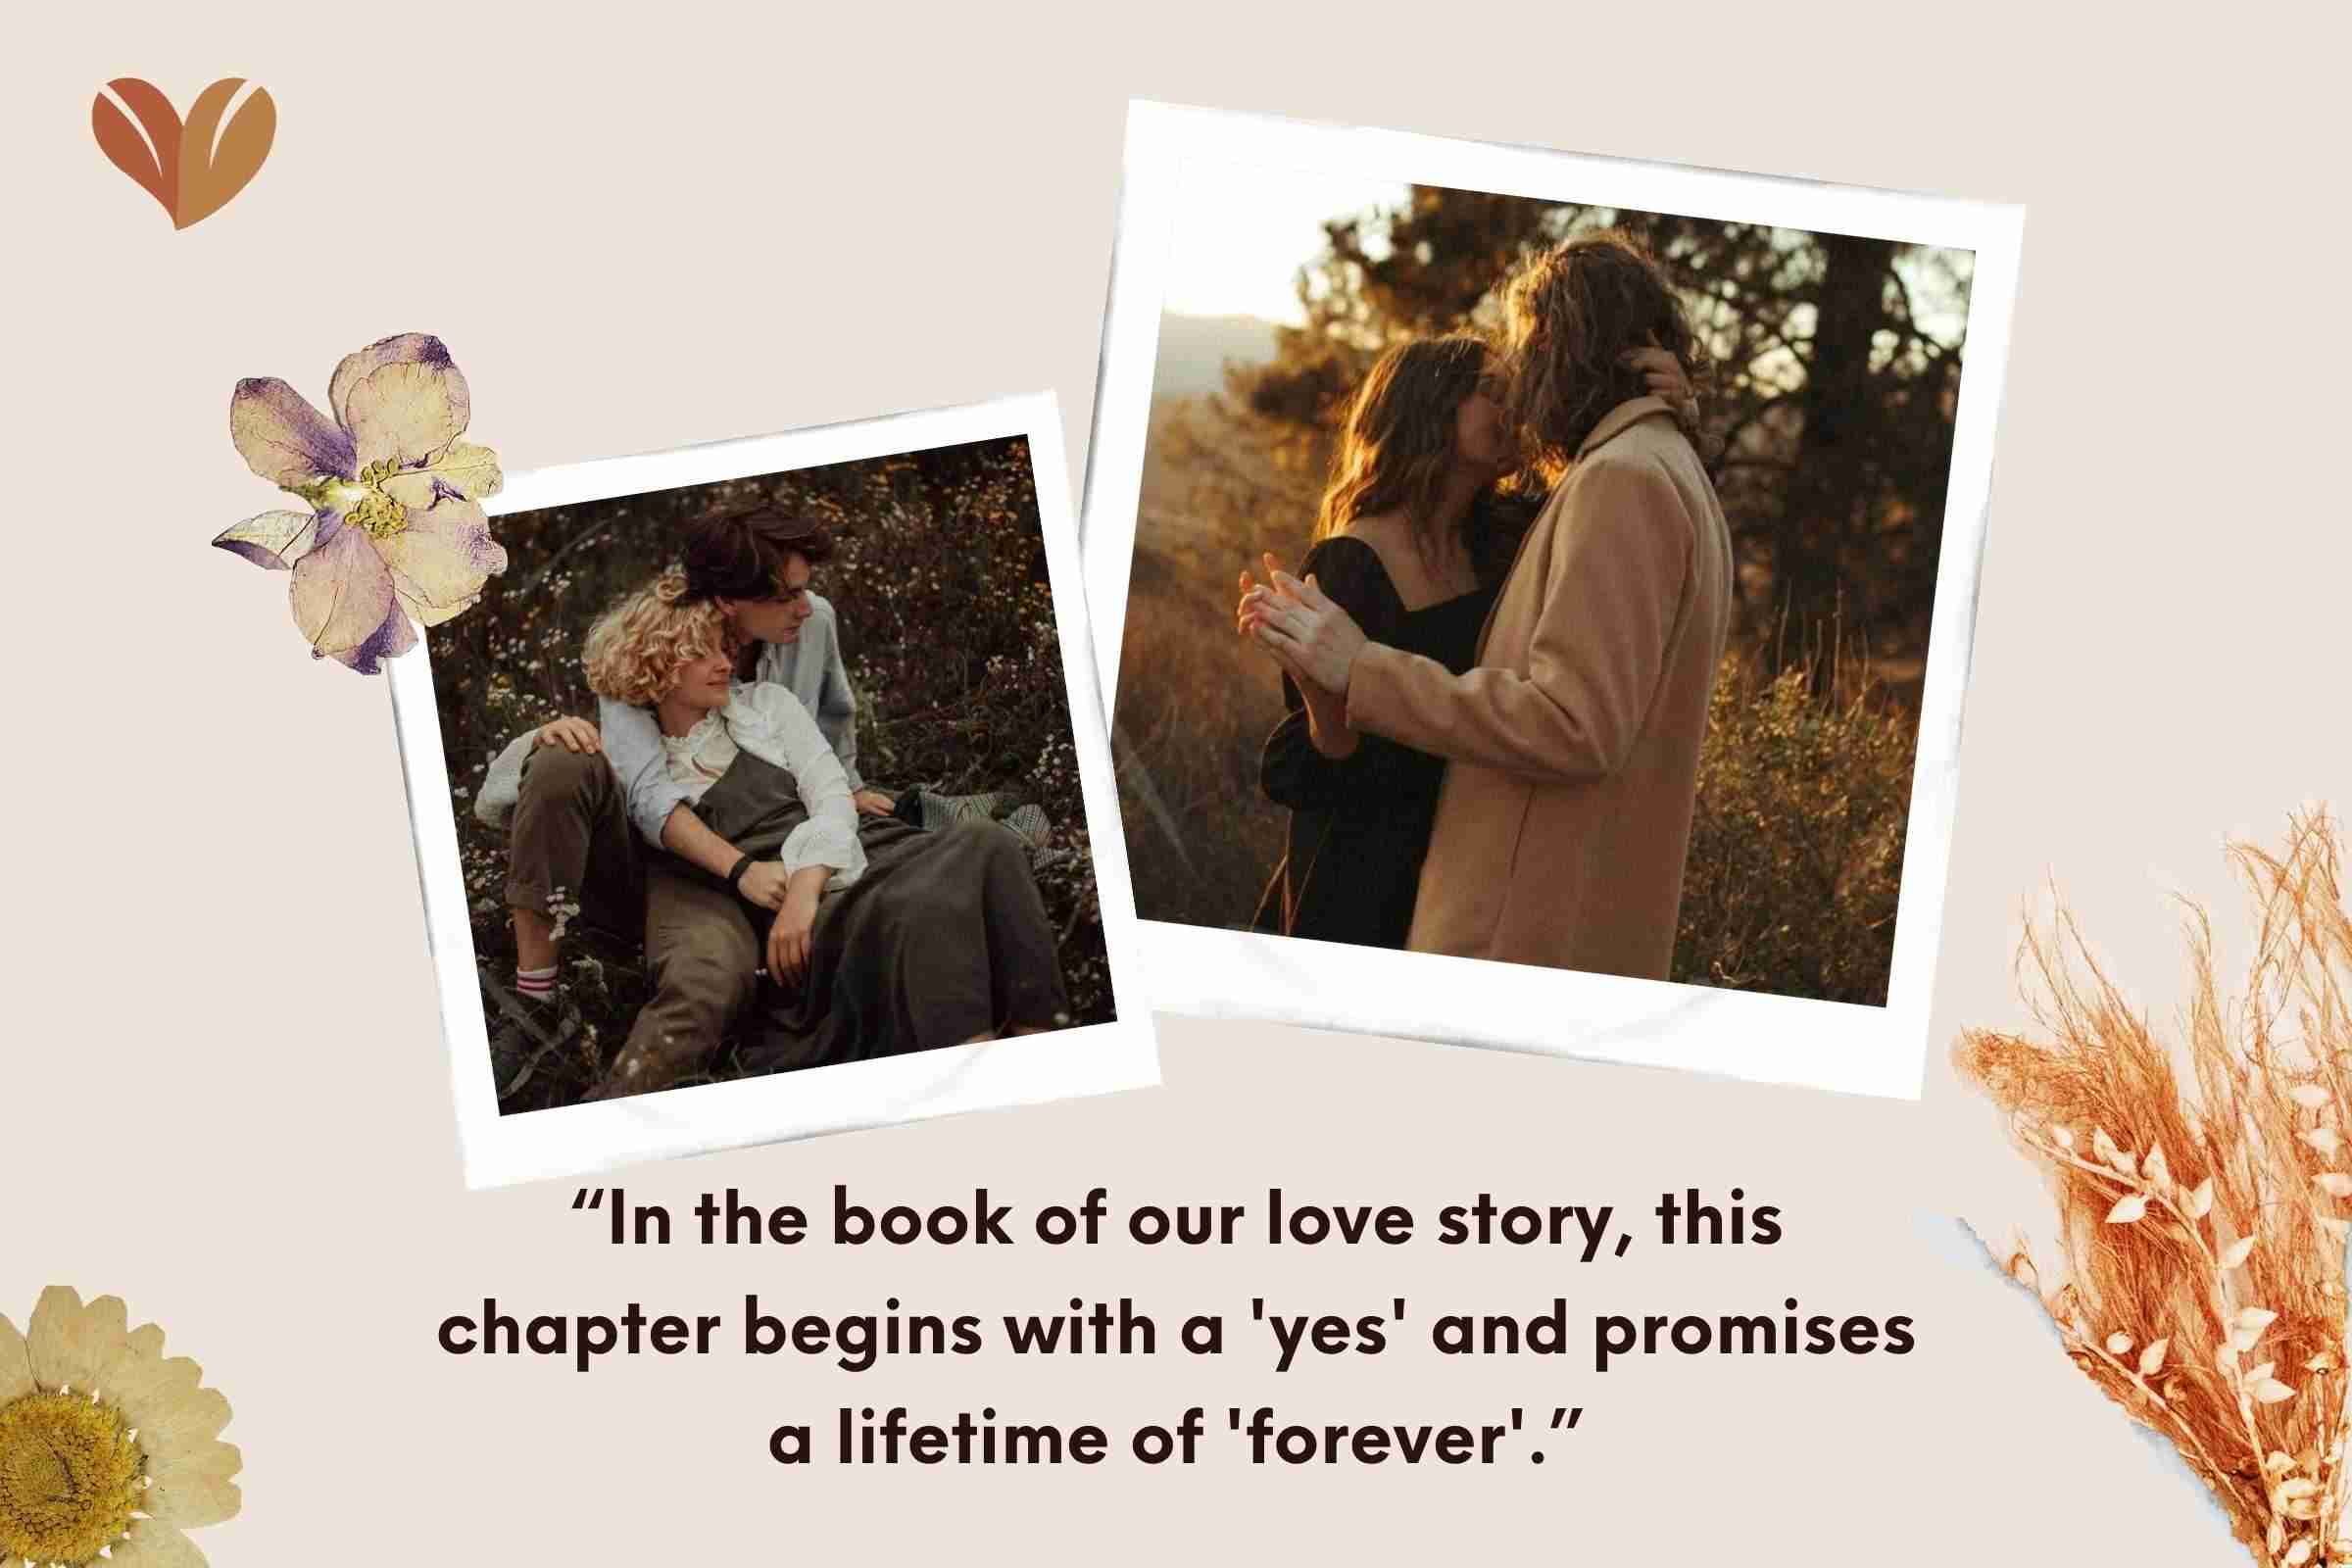 “In the book of our love story, this chapter begins with a 'yes' and promises a lifetime of 'forever'.”